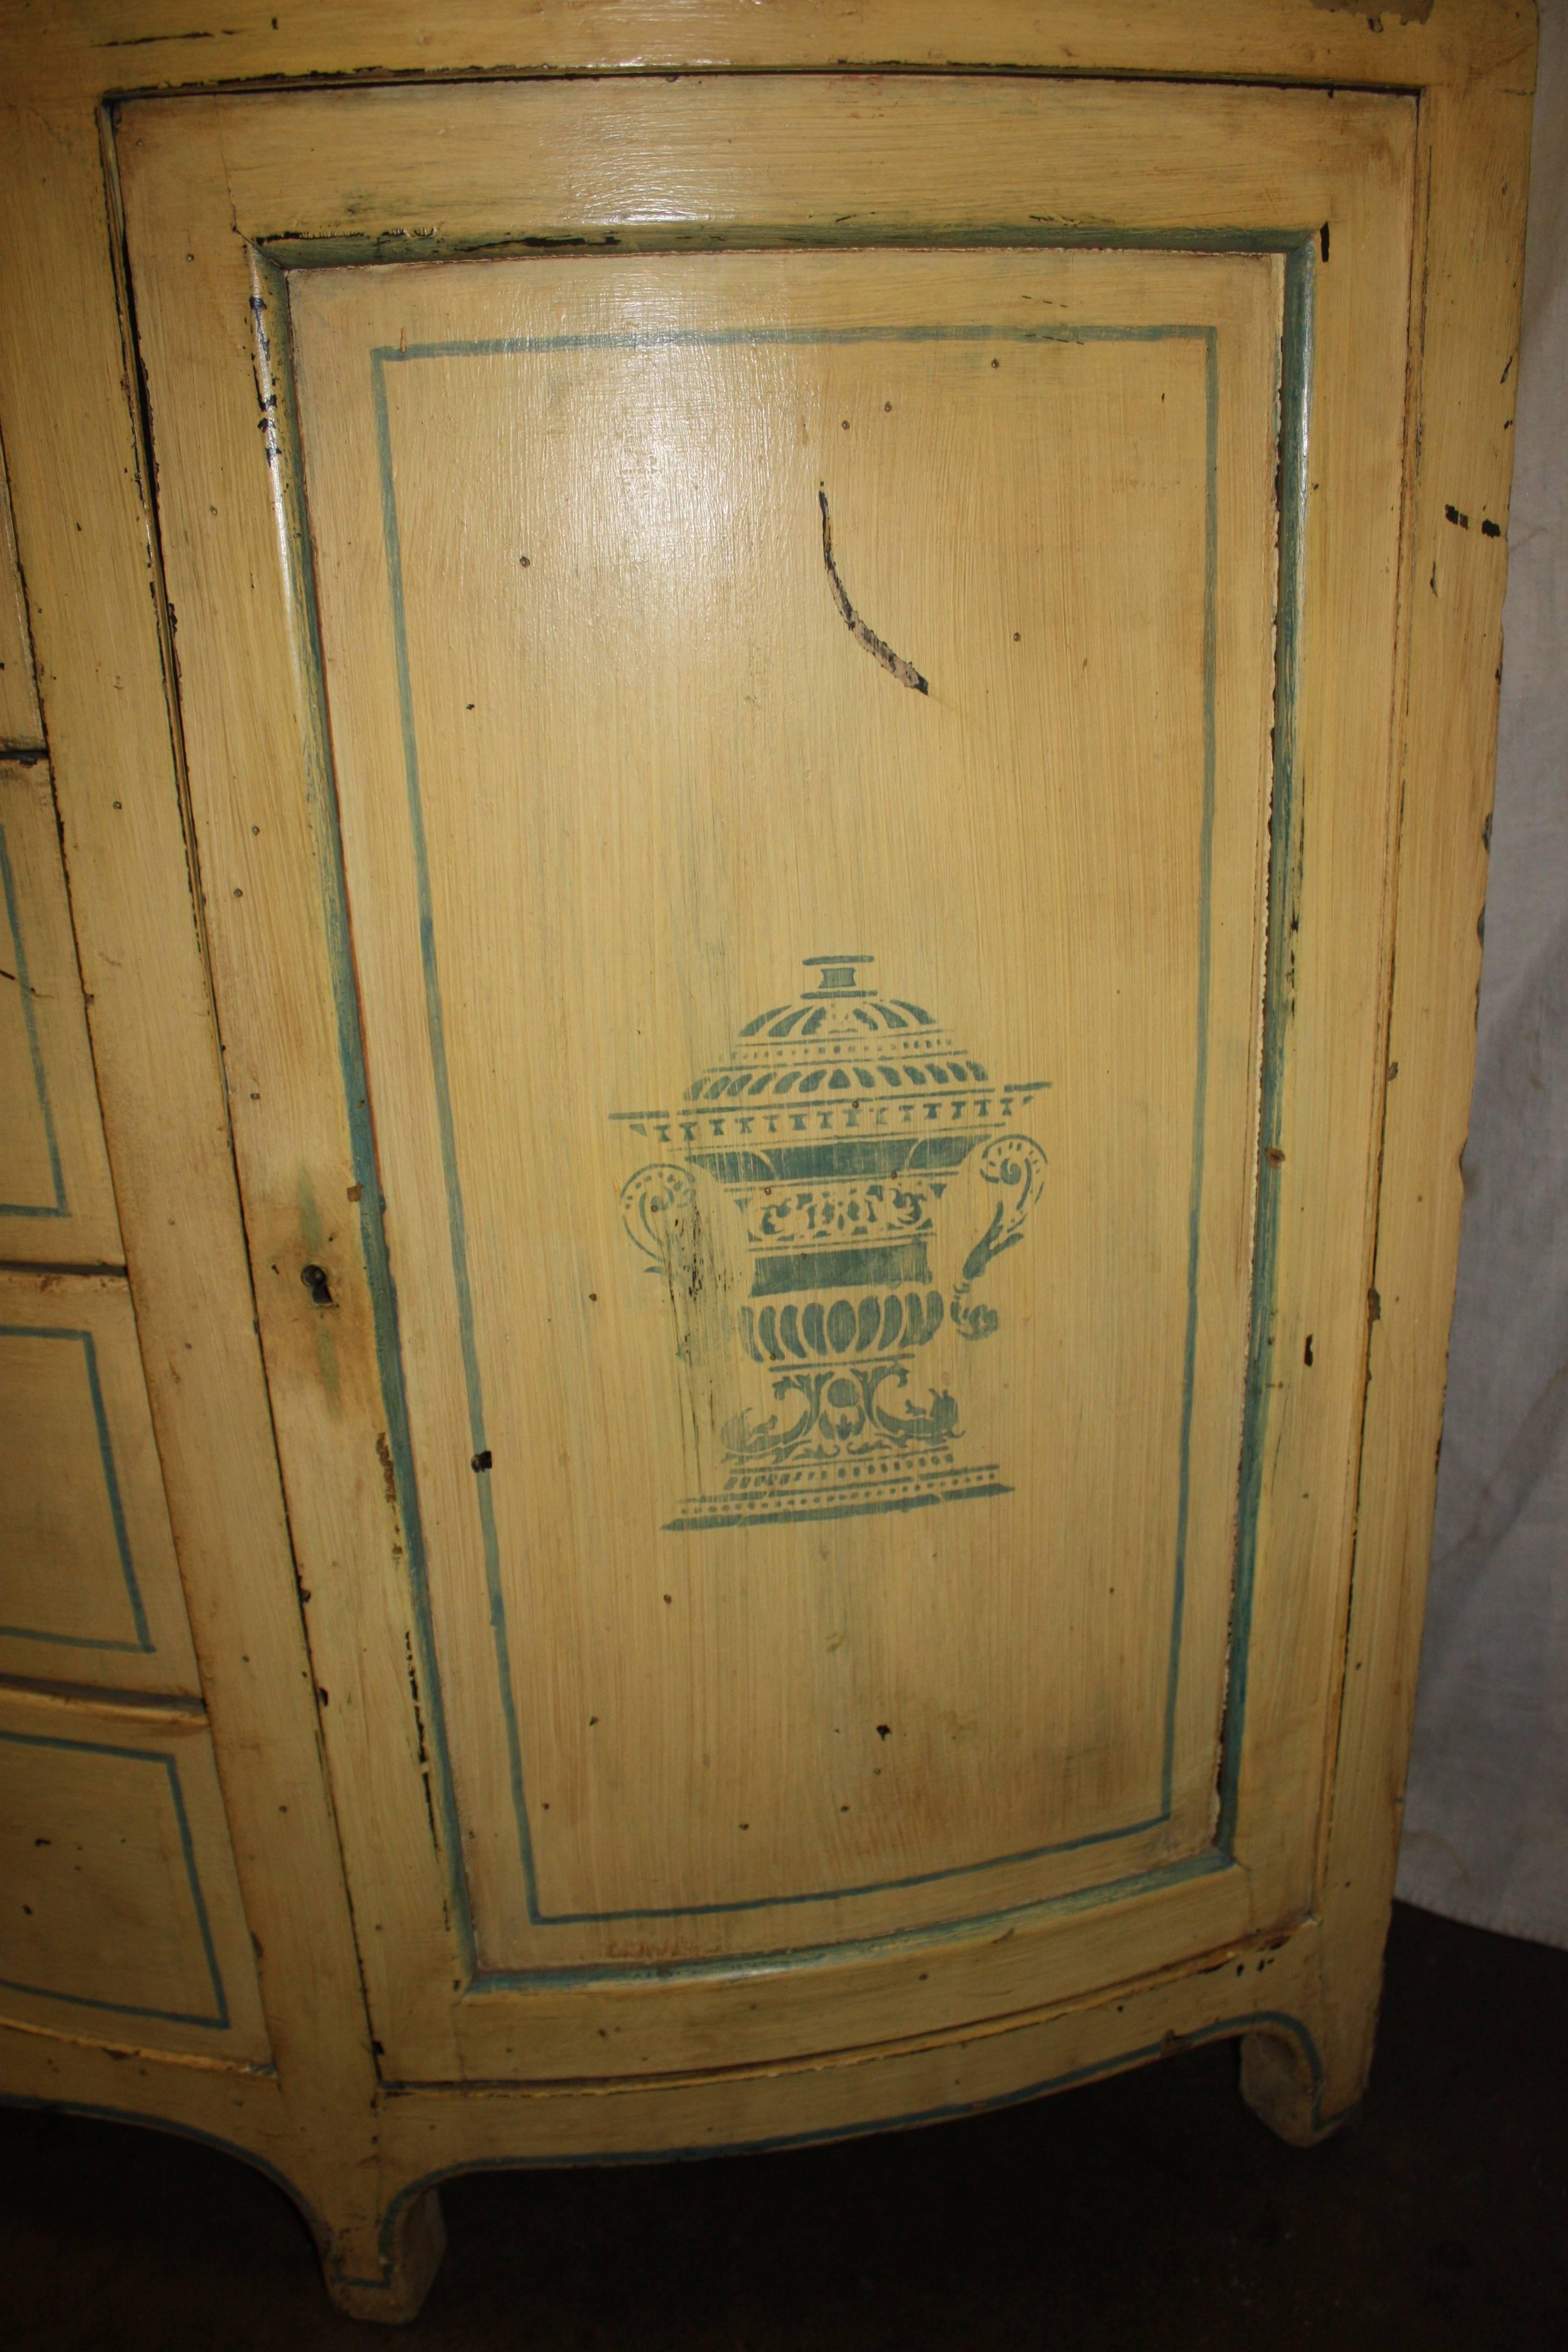 Charming Early 20th Century Half-Moon Chest In Good Condition For Sale In Stockbridge, GA